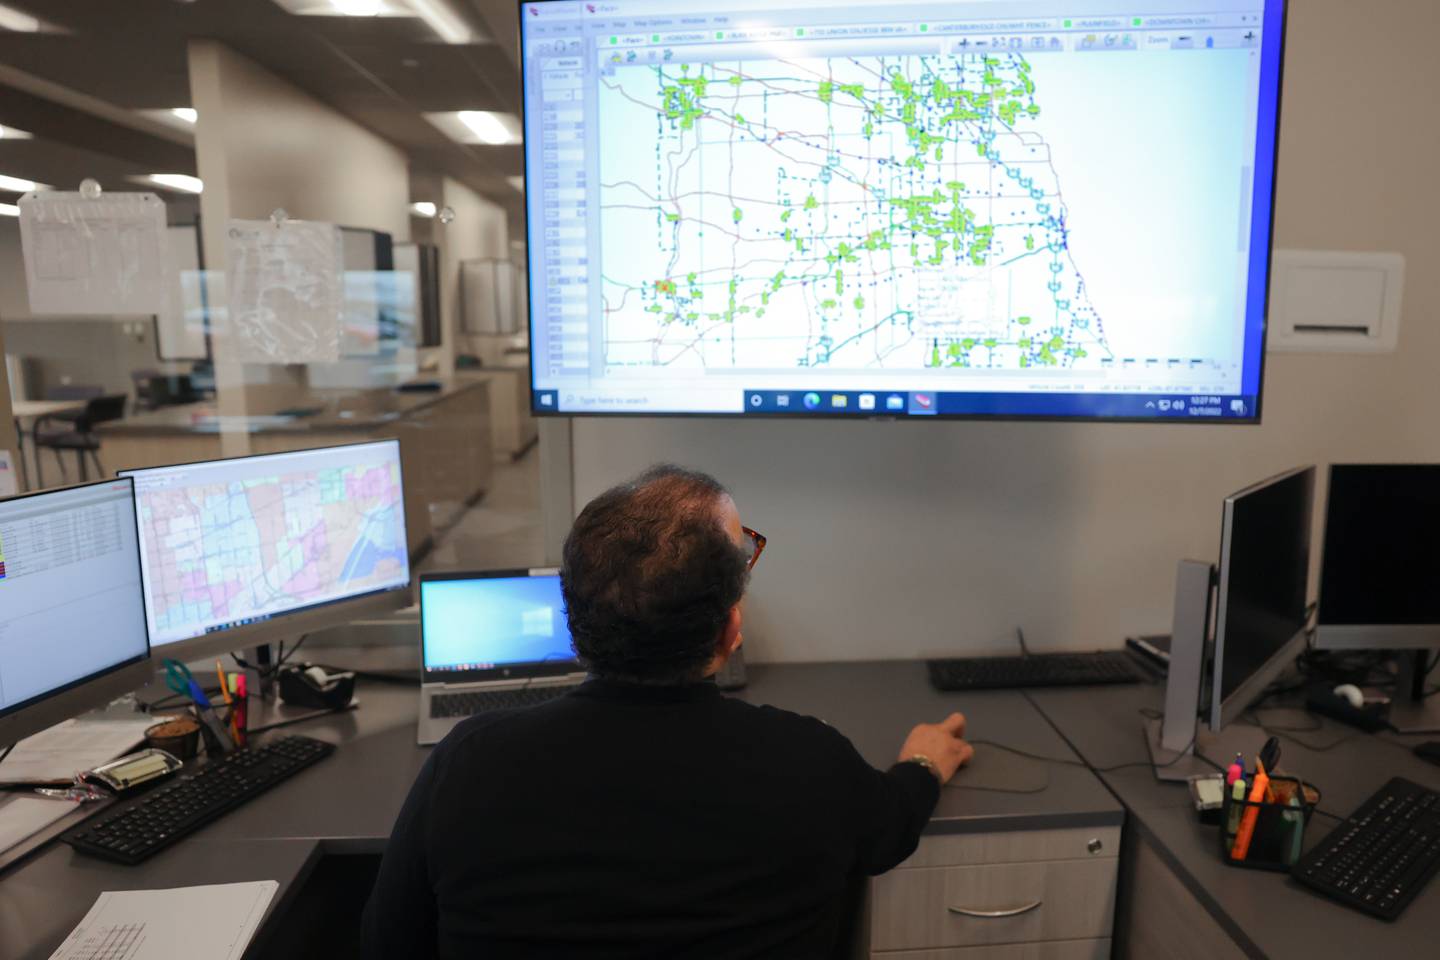 David Dines, Superintendent of Transportation, monitors all the Pace vehicles on the road in Chicago and surrounding suburbs in the dispatch room at the New Heritage Plainfield Facility.